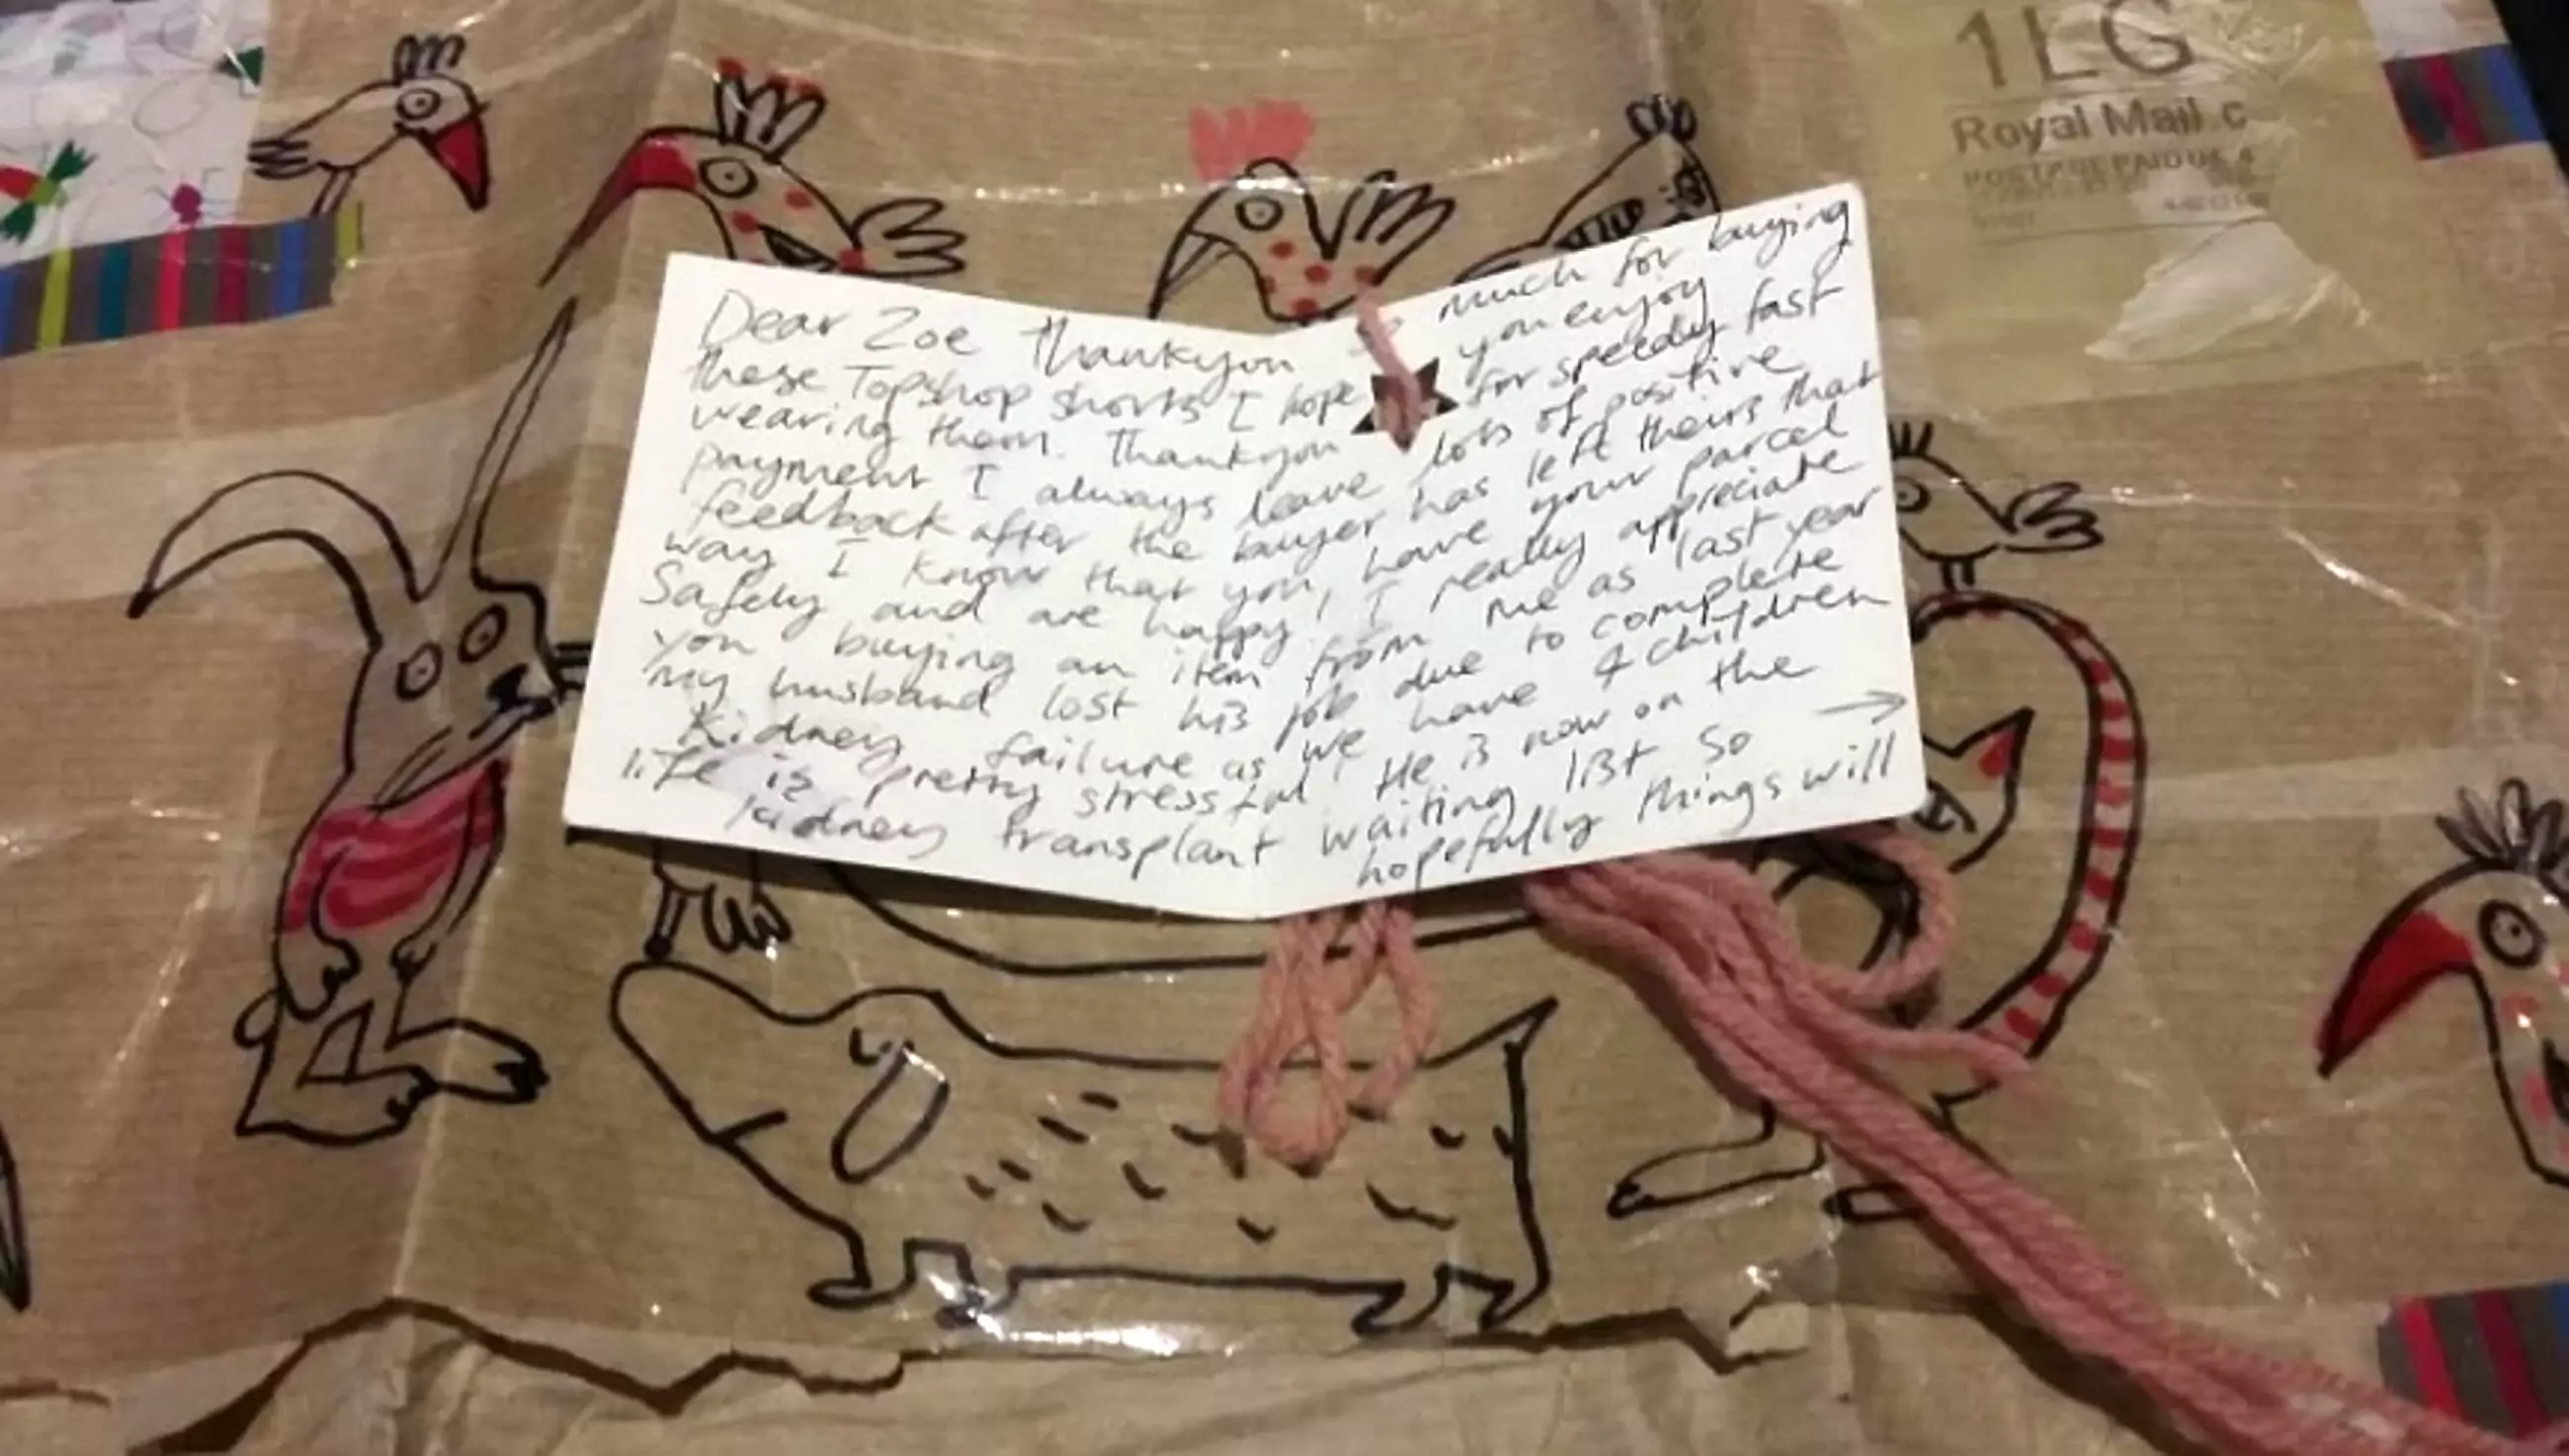 The note inside the package.